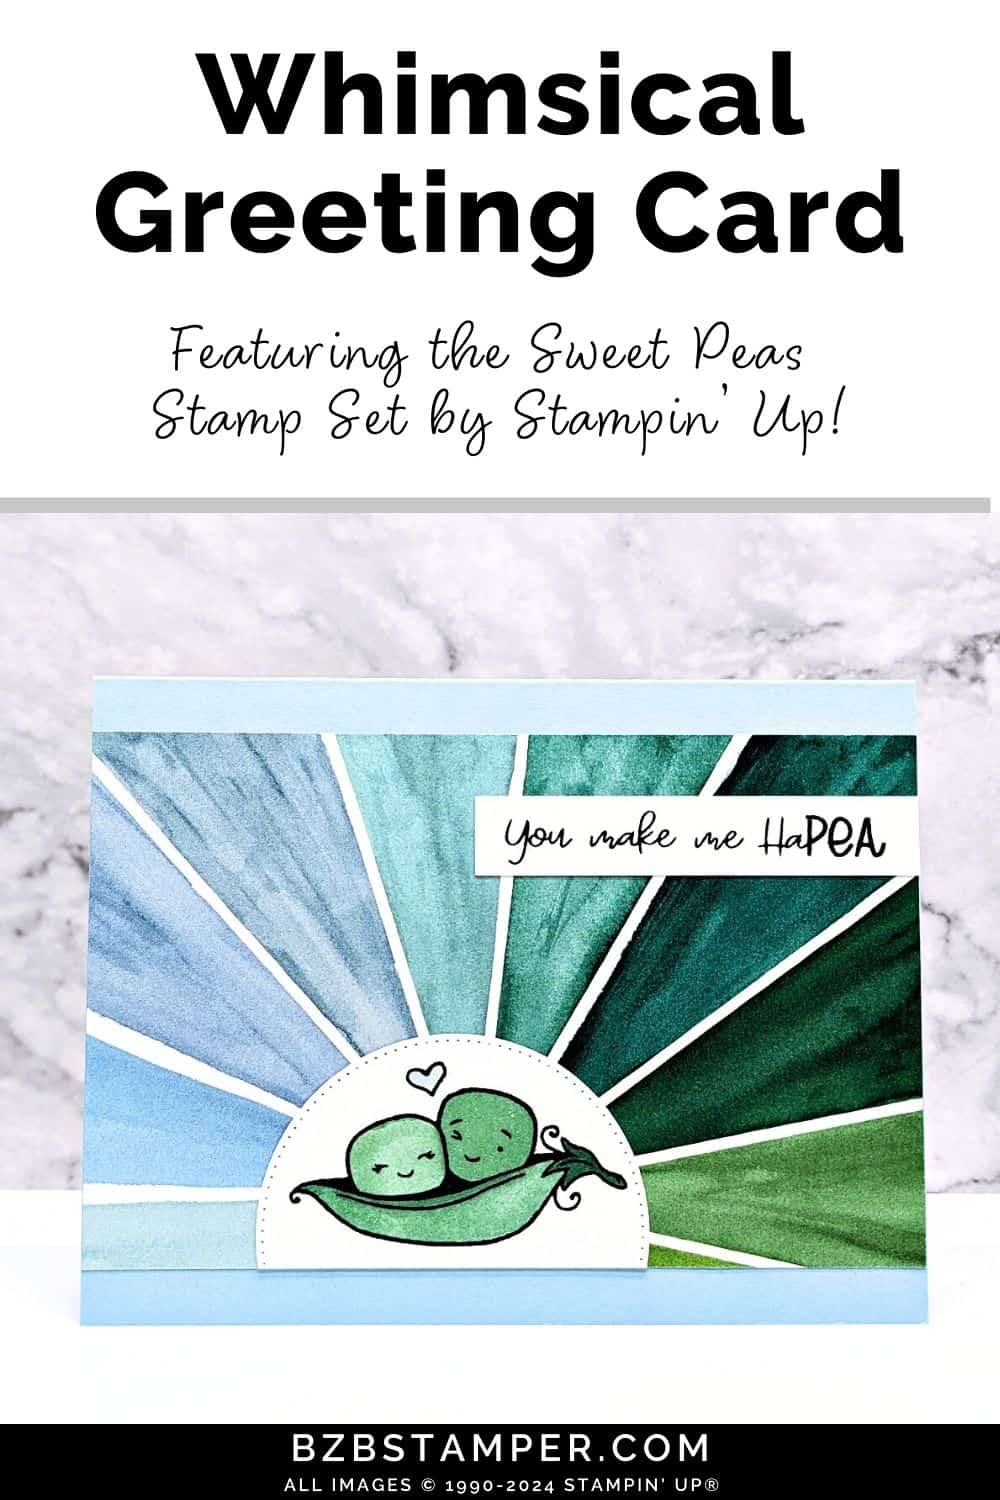 Crafting Joy with the Sweet Peas Stamp Set by Stampin' Up in blues and greens.  Two peas in a pod cute image with a "you make me haPEA" sentiment.